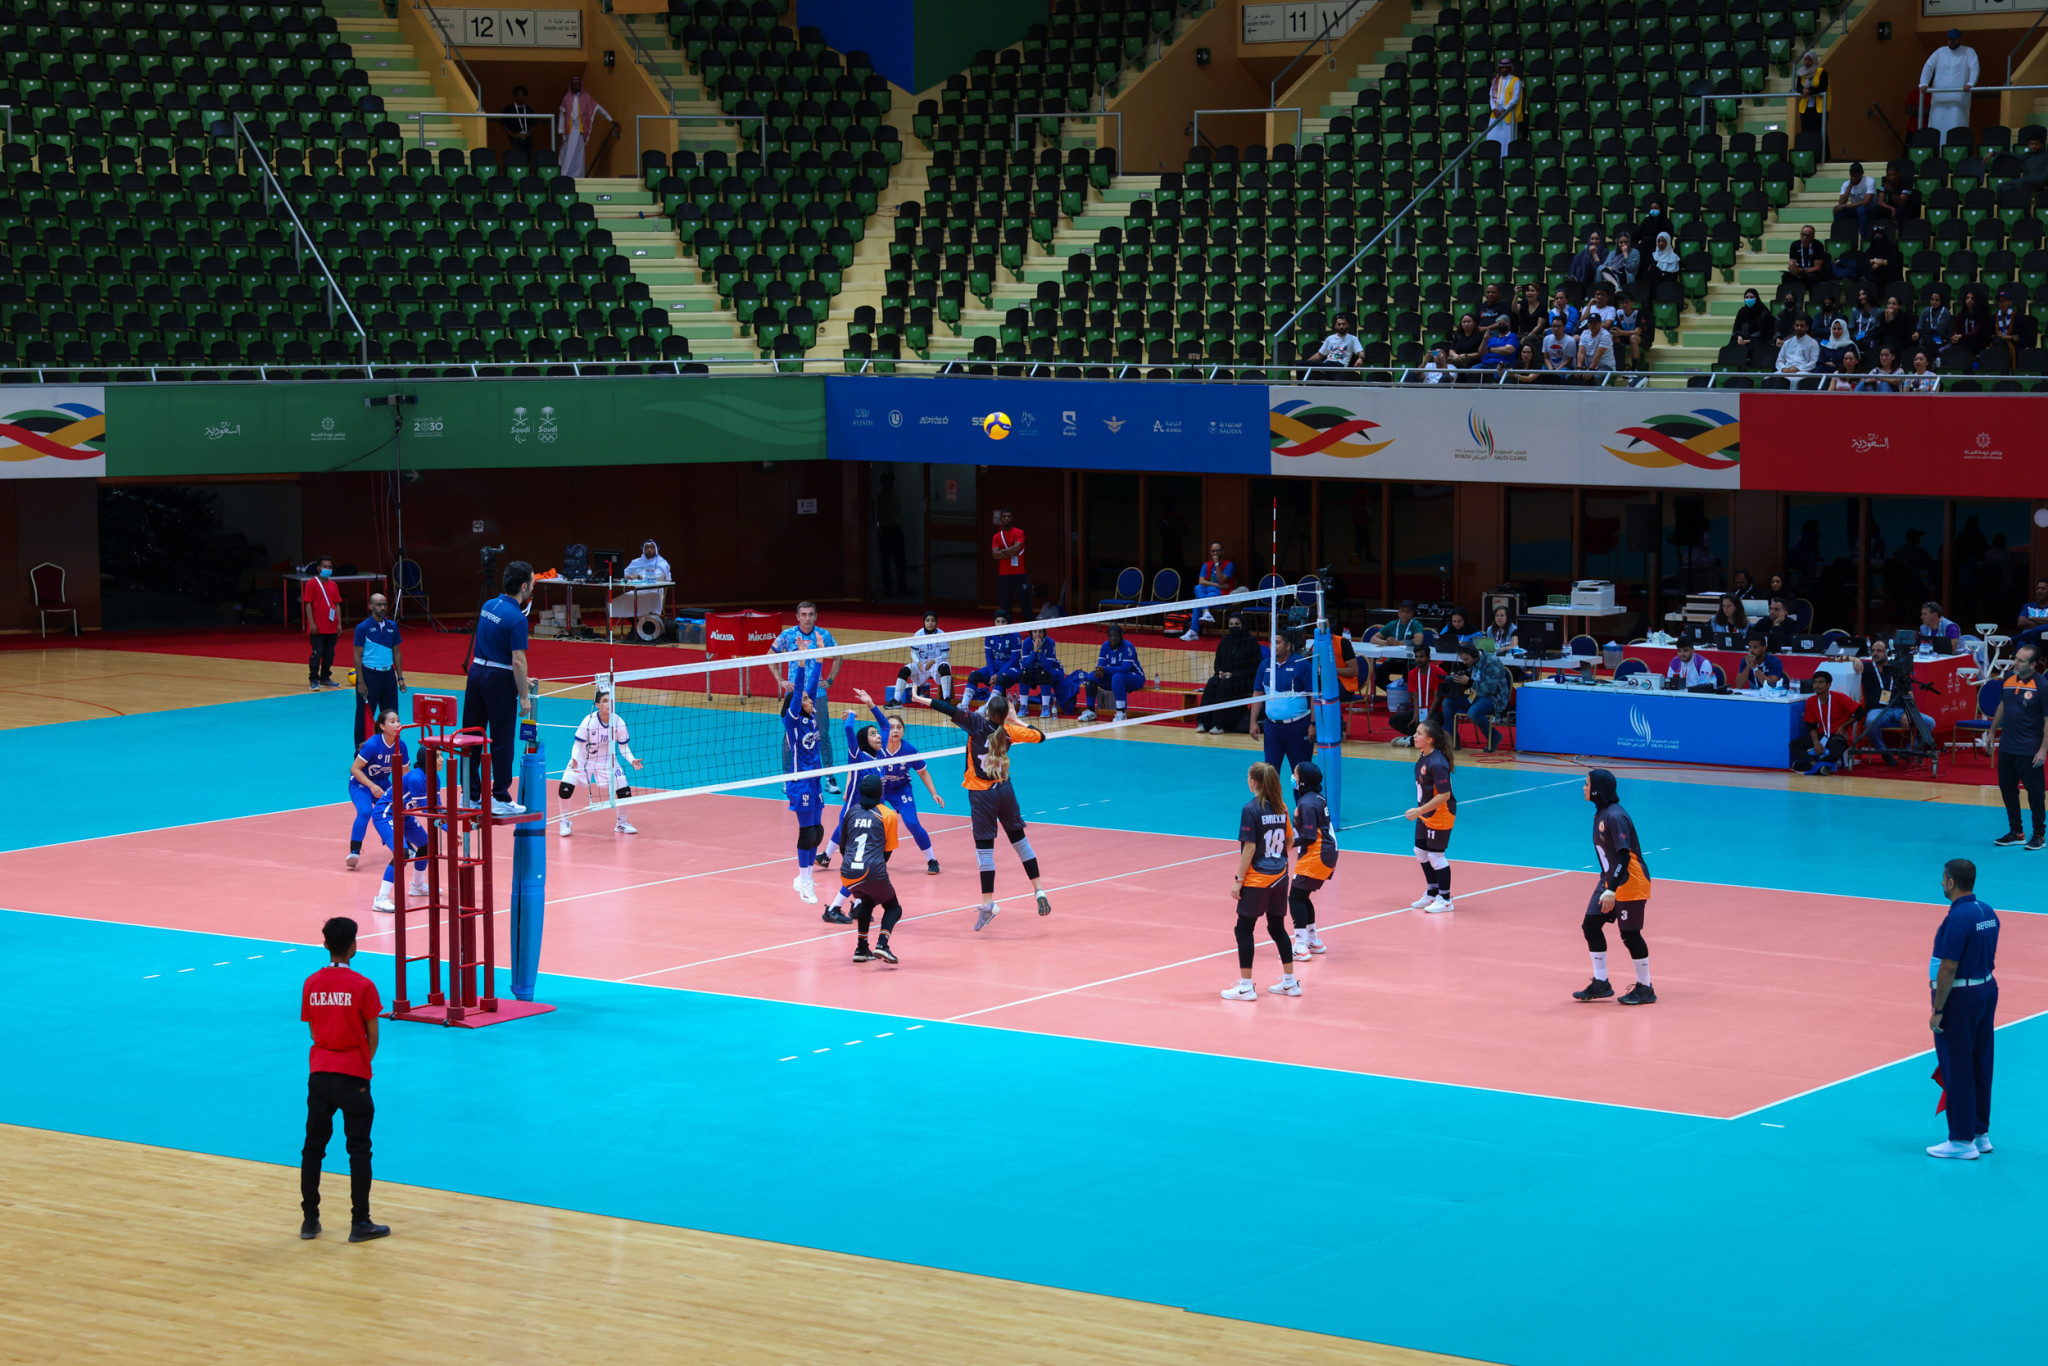 Volleyball got underway at the Prince Faisal bin Fahad Olympic Complex ©Saudi Games